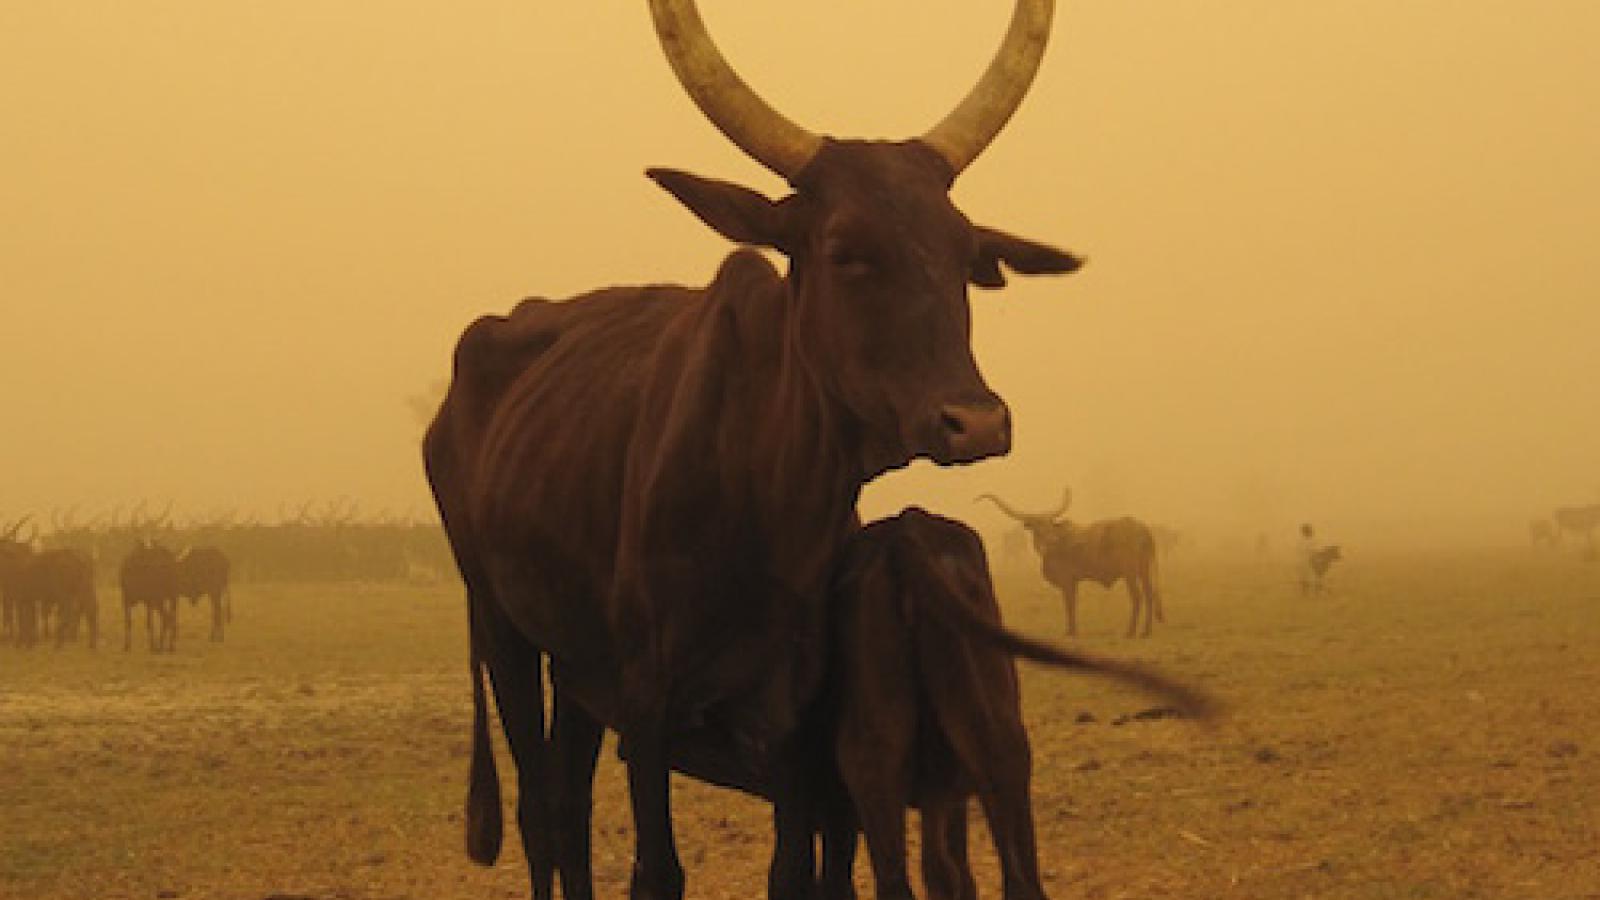 cattle in dust storm.